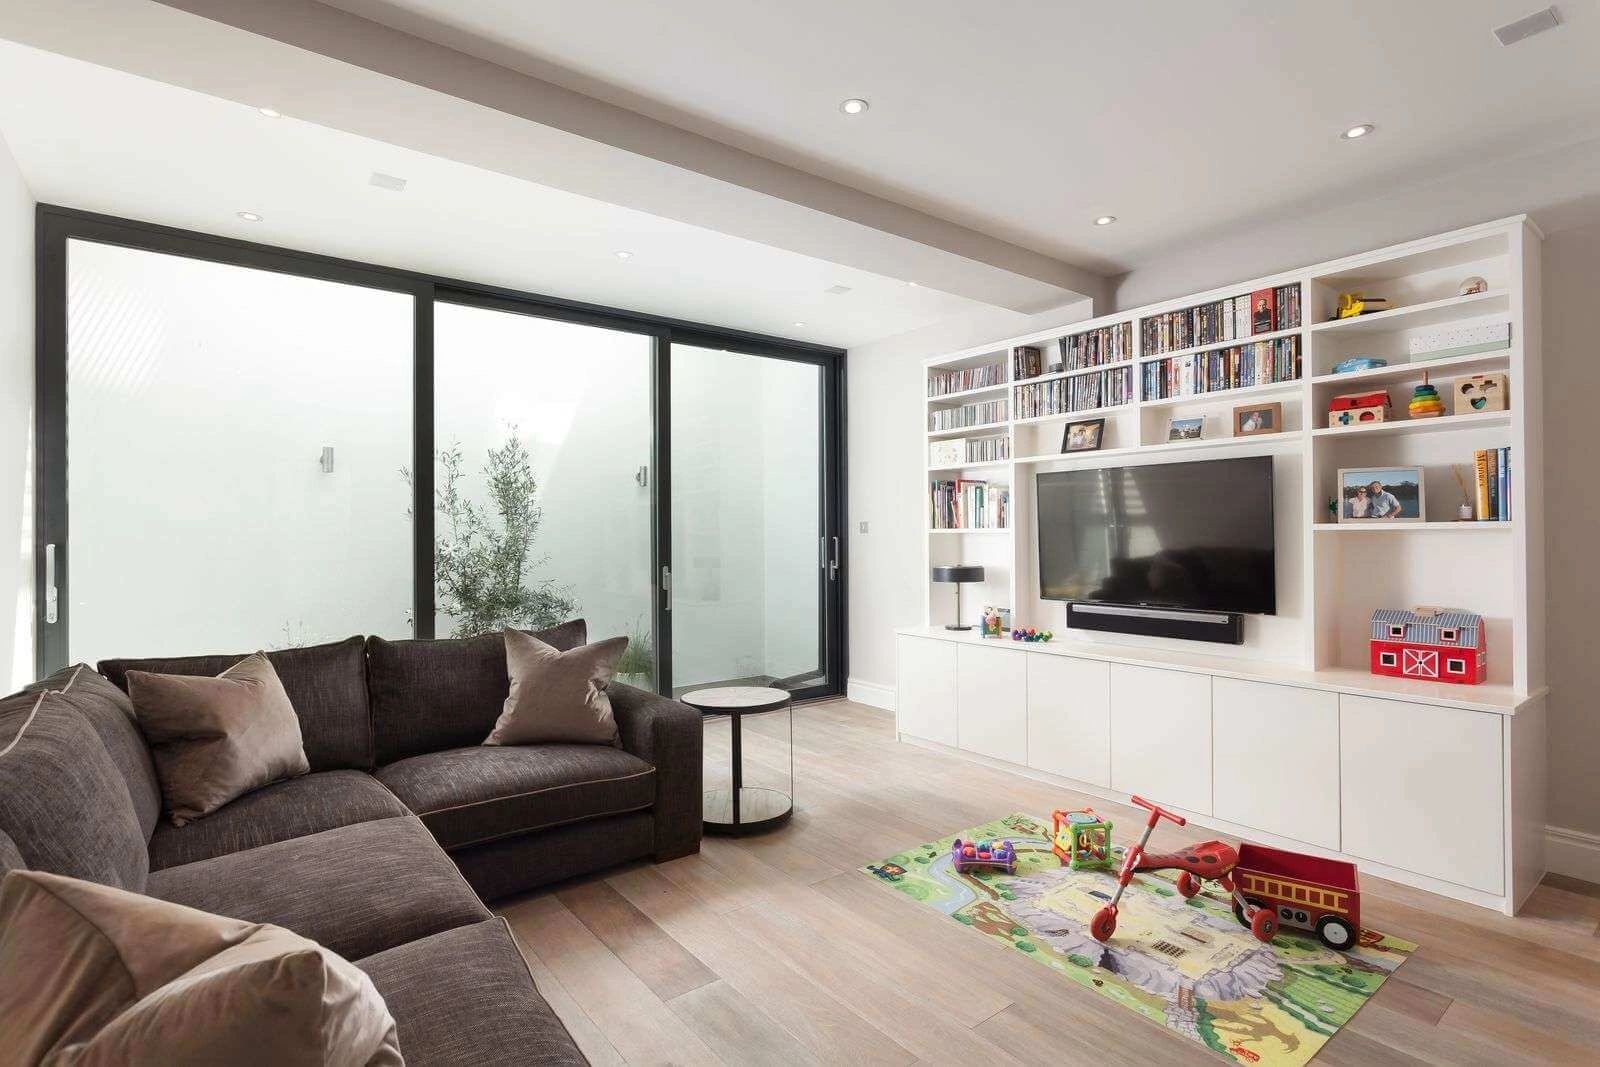 Hackney, East London Construction basement extension by our team of trusted London builders.